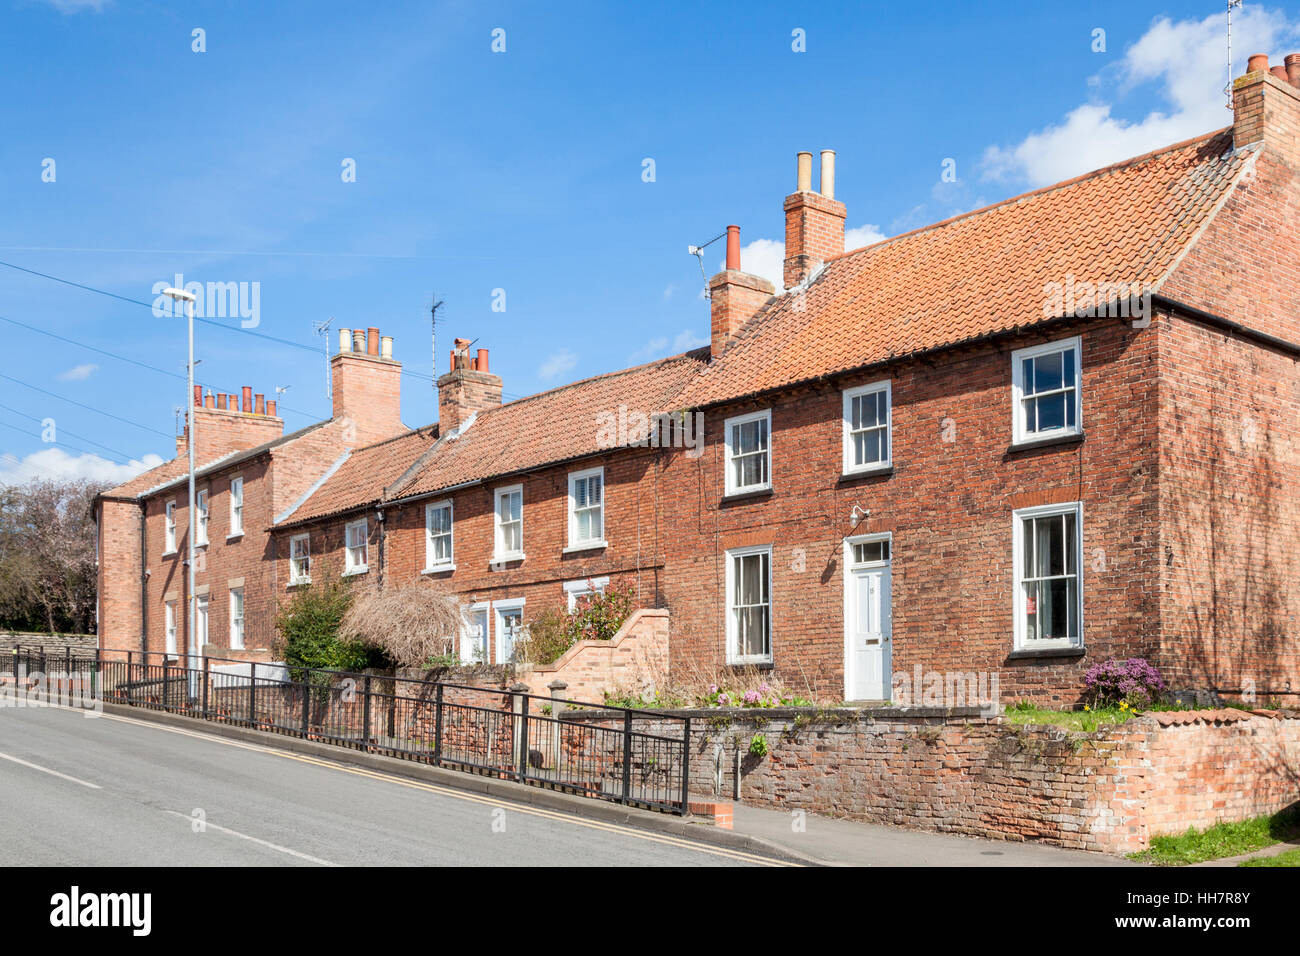 Brick built terraced cottages on a hill, Southwell, Nottinghamshire, England, UK Stock Photo